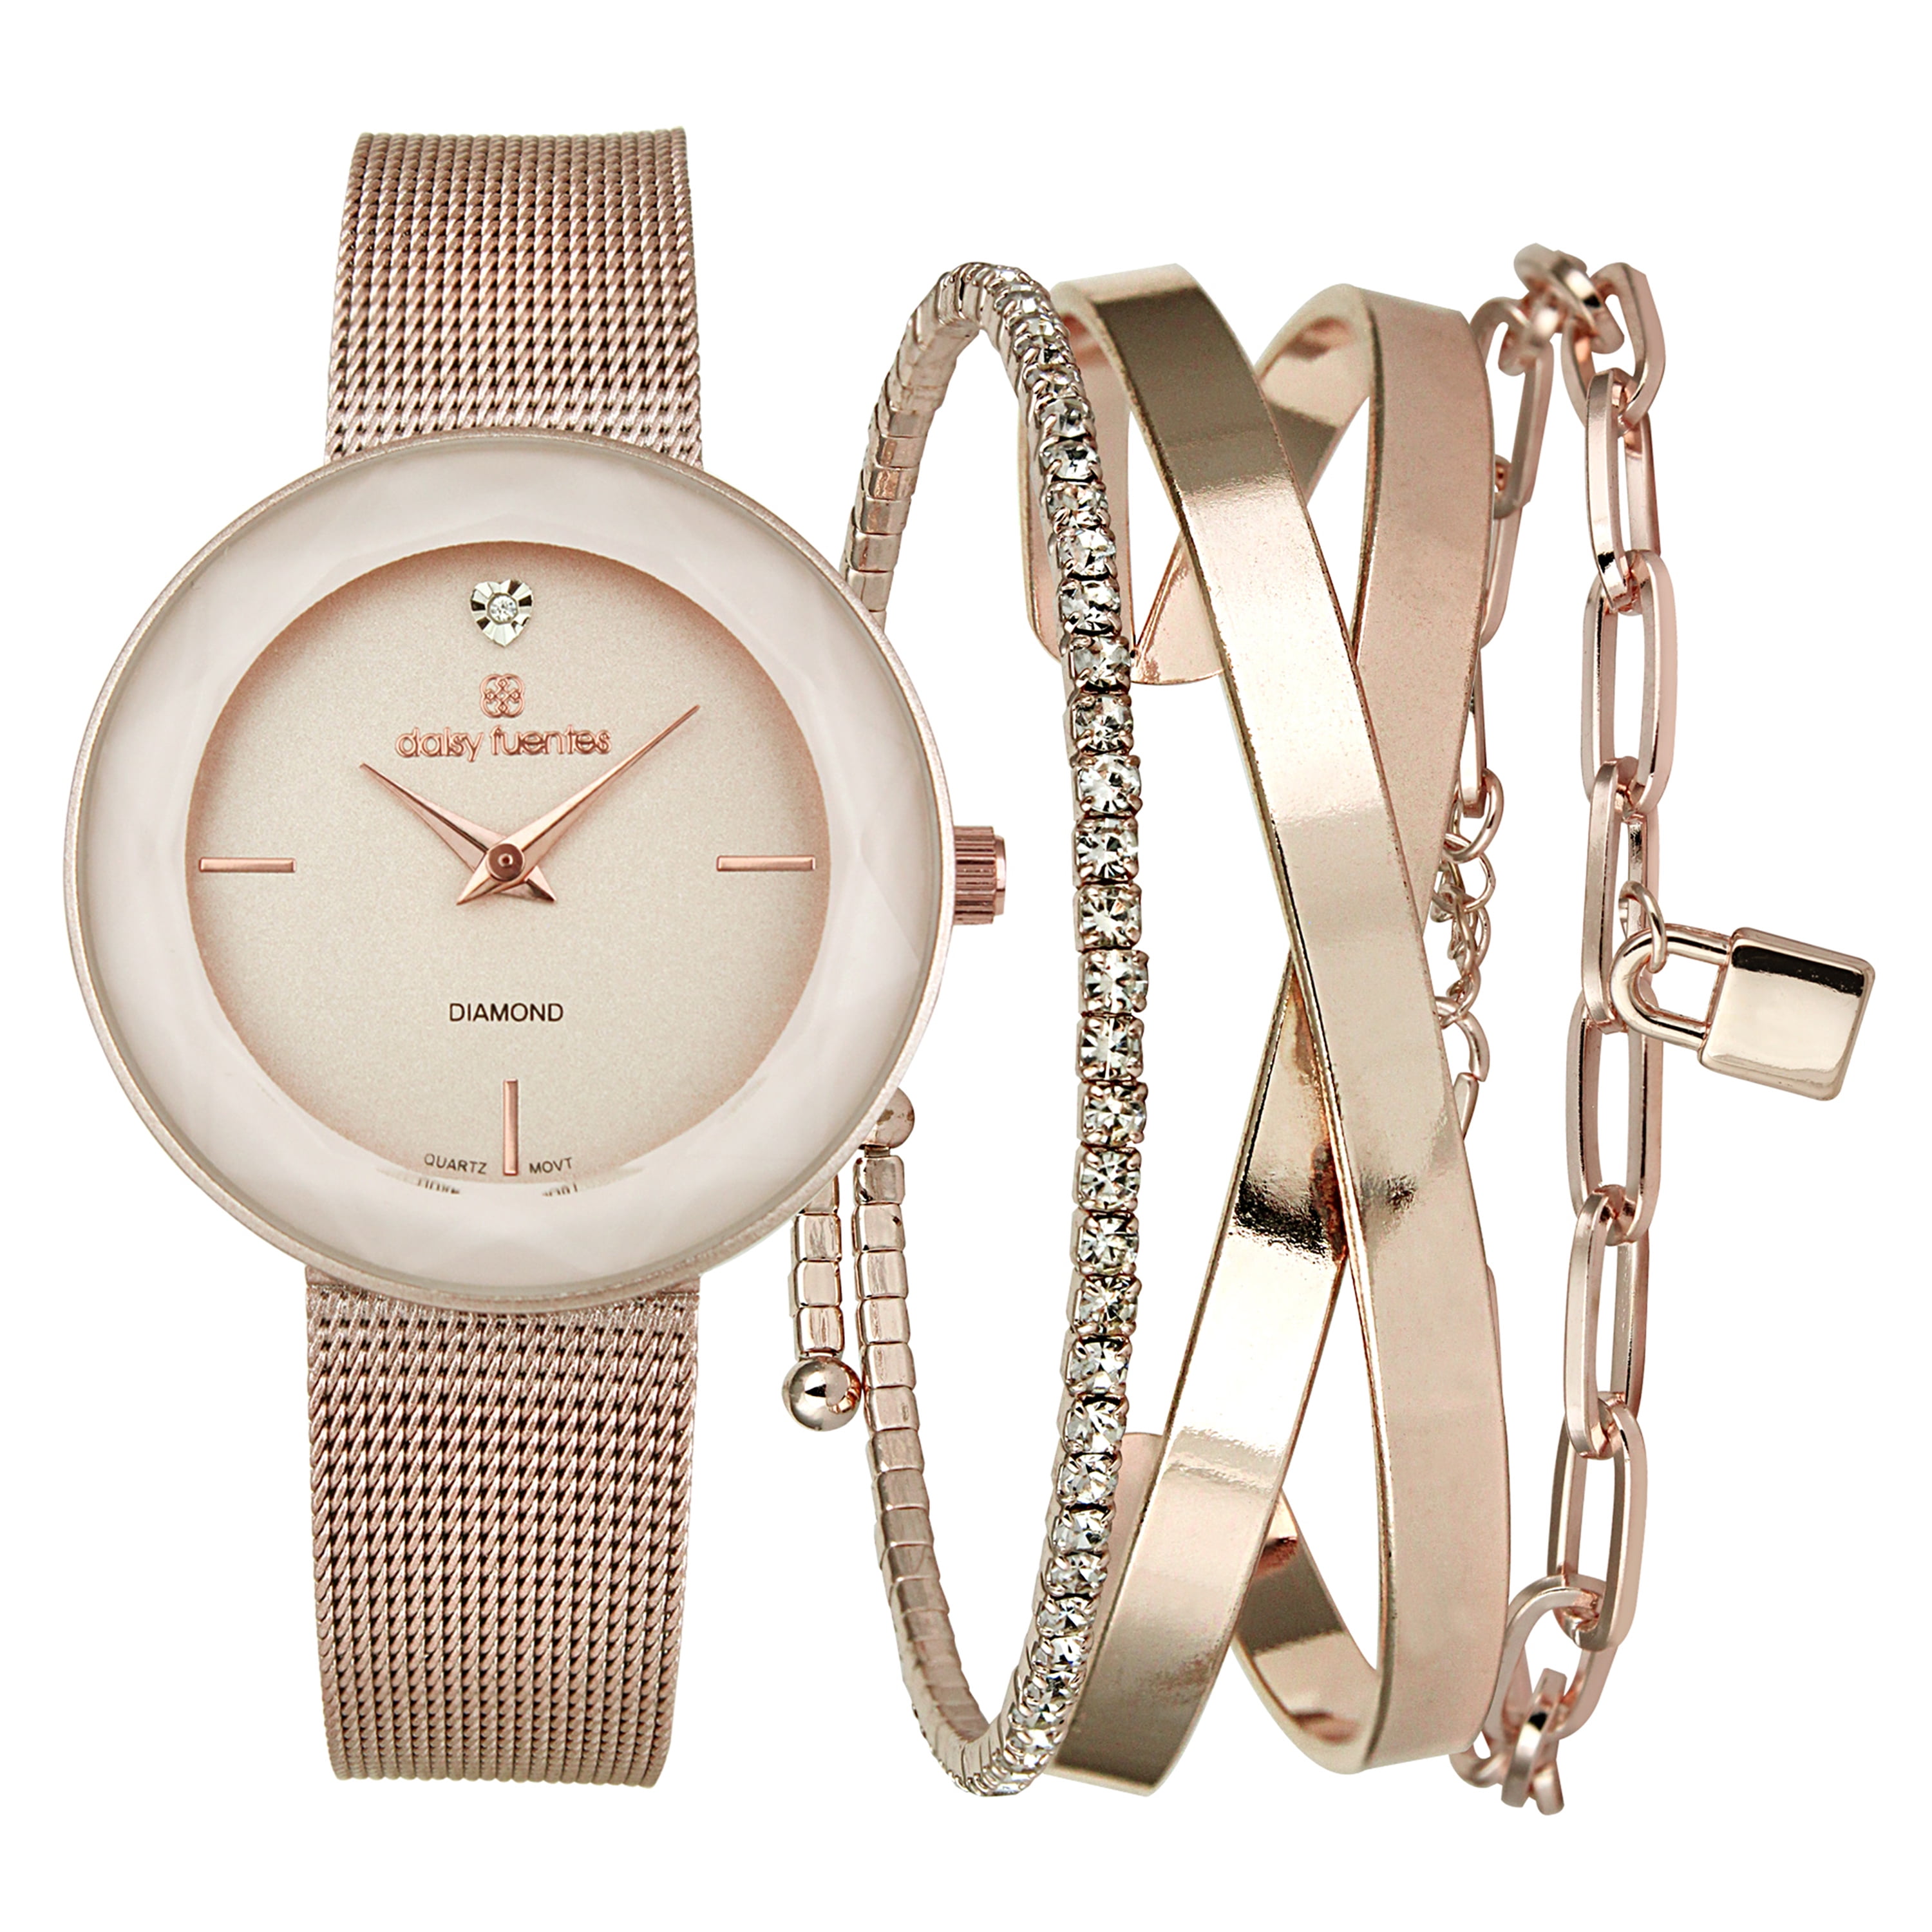 DAISY FUENTES Stunning Gold Women's Watch with Diamond Accent and Elegant  Mesh Bracelet - A Timeless Beauty for Style-Conscious Women 